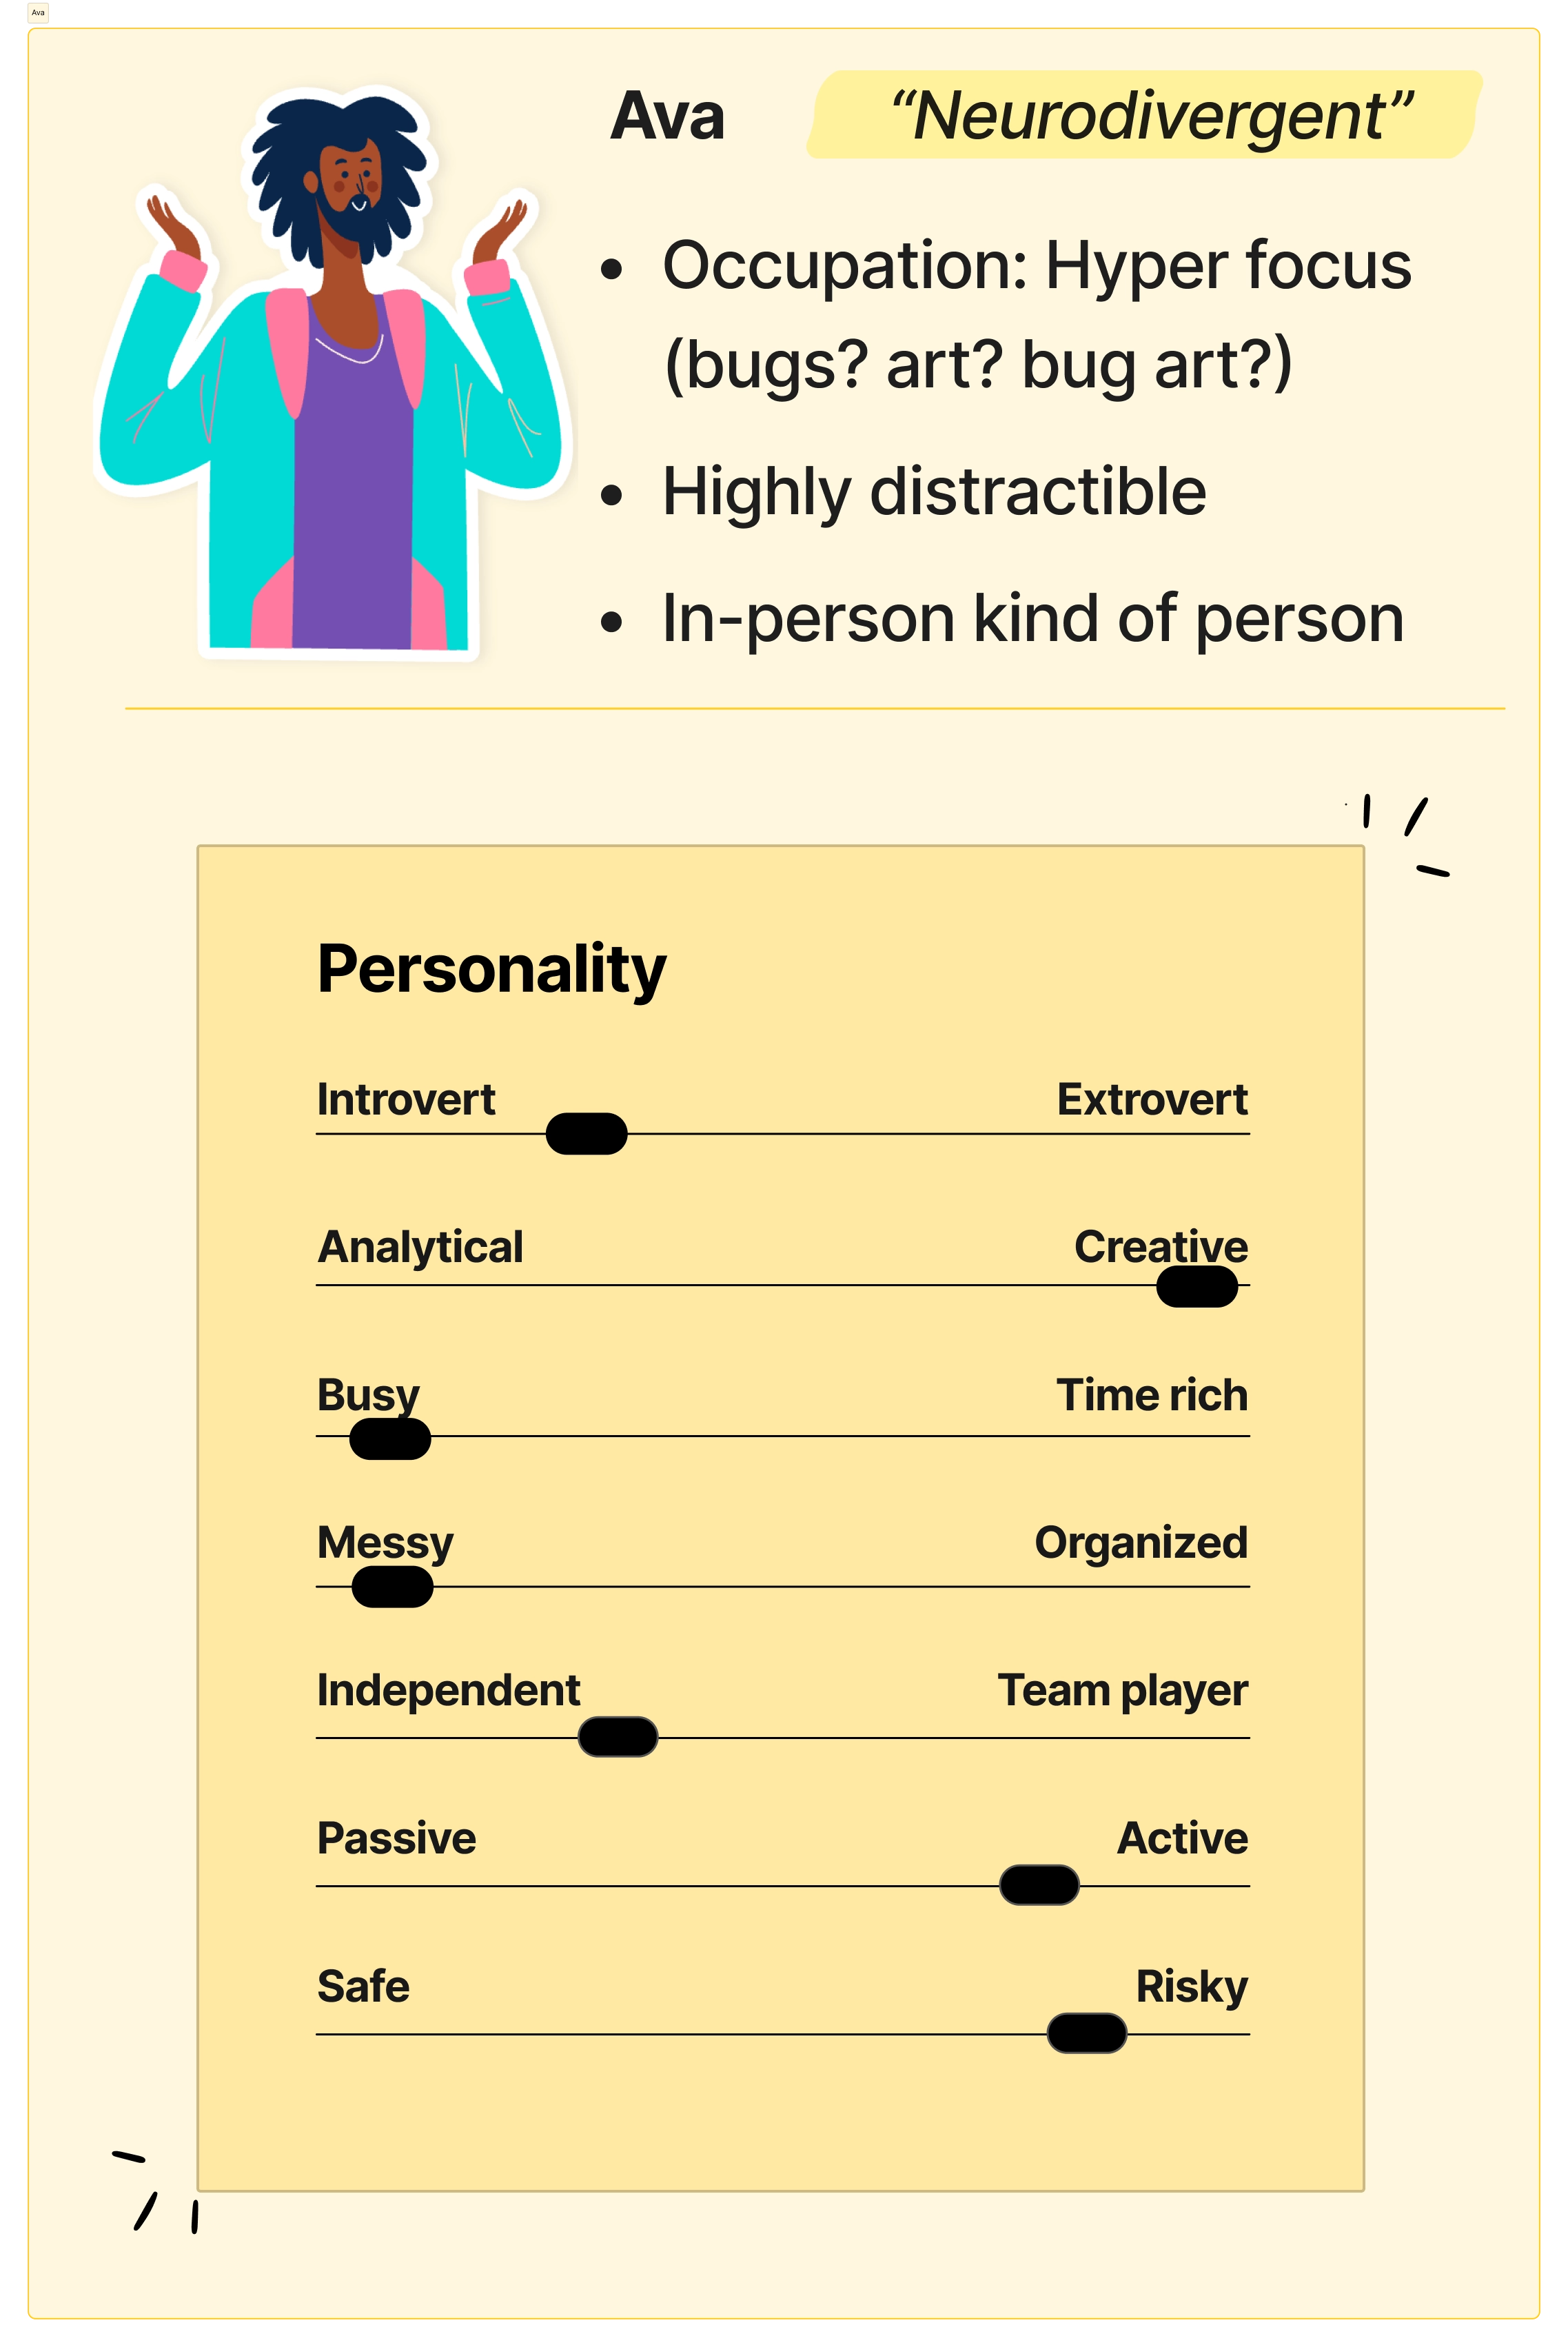 A cartoon person with black hair and a beard wearing a teal jacket appears next to some information.'Ava, nuerodivergent, occupation: hyper focus (bugs? art? bug art?), highly distractable, 'in-person' kind of person. Personality: introverted, creative, busy, messy, independent, active, risky.'